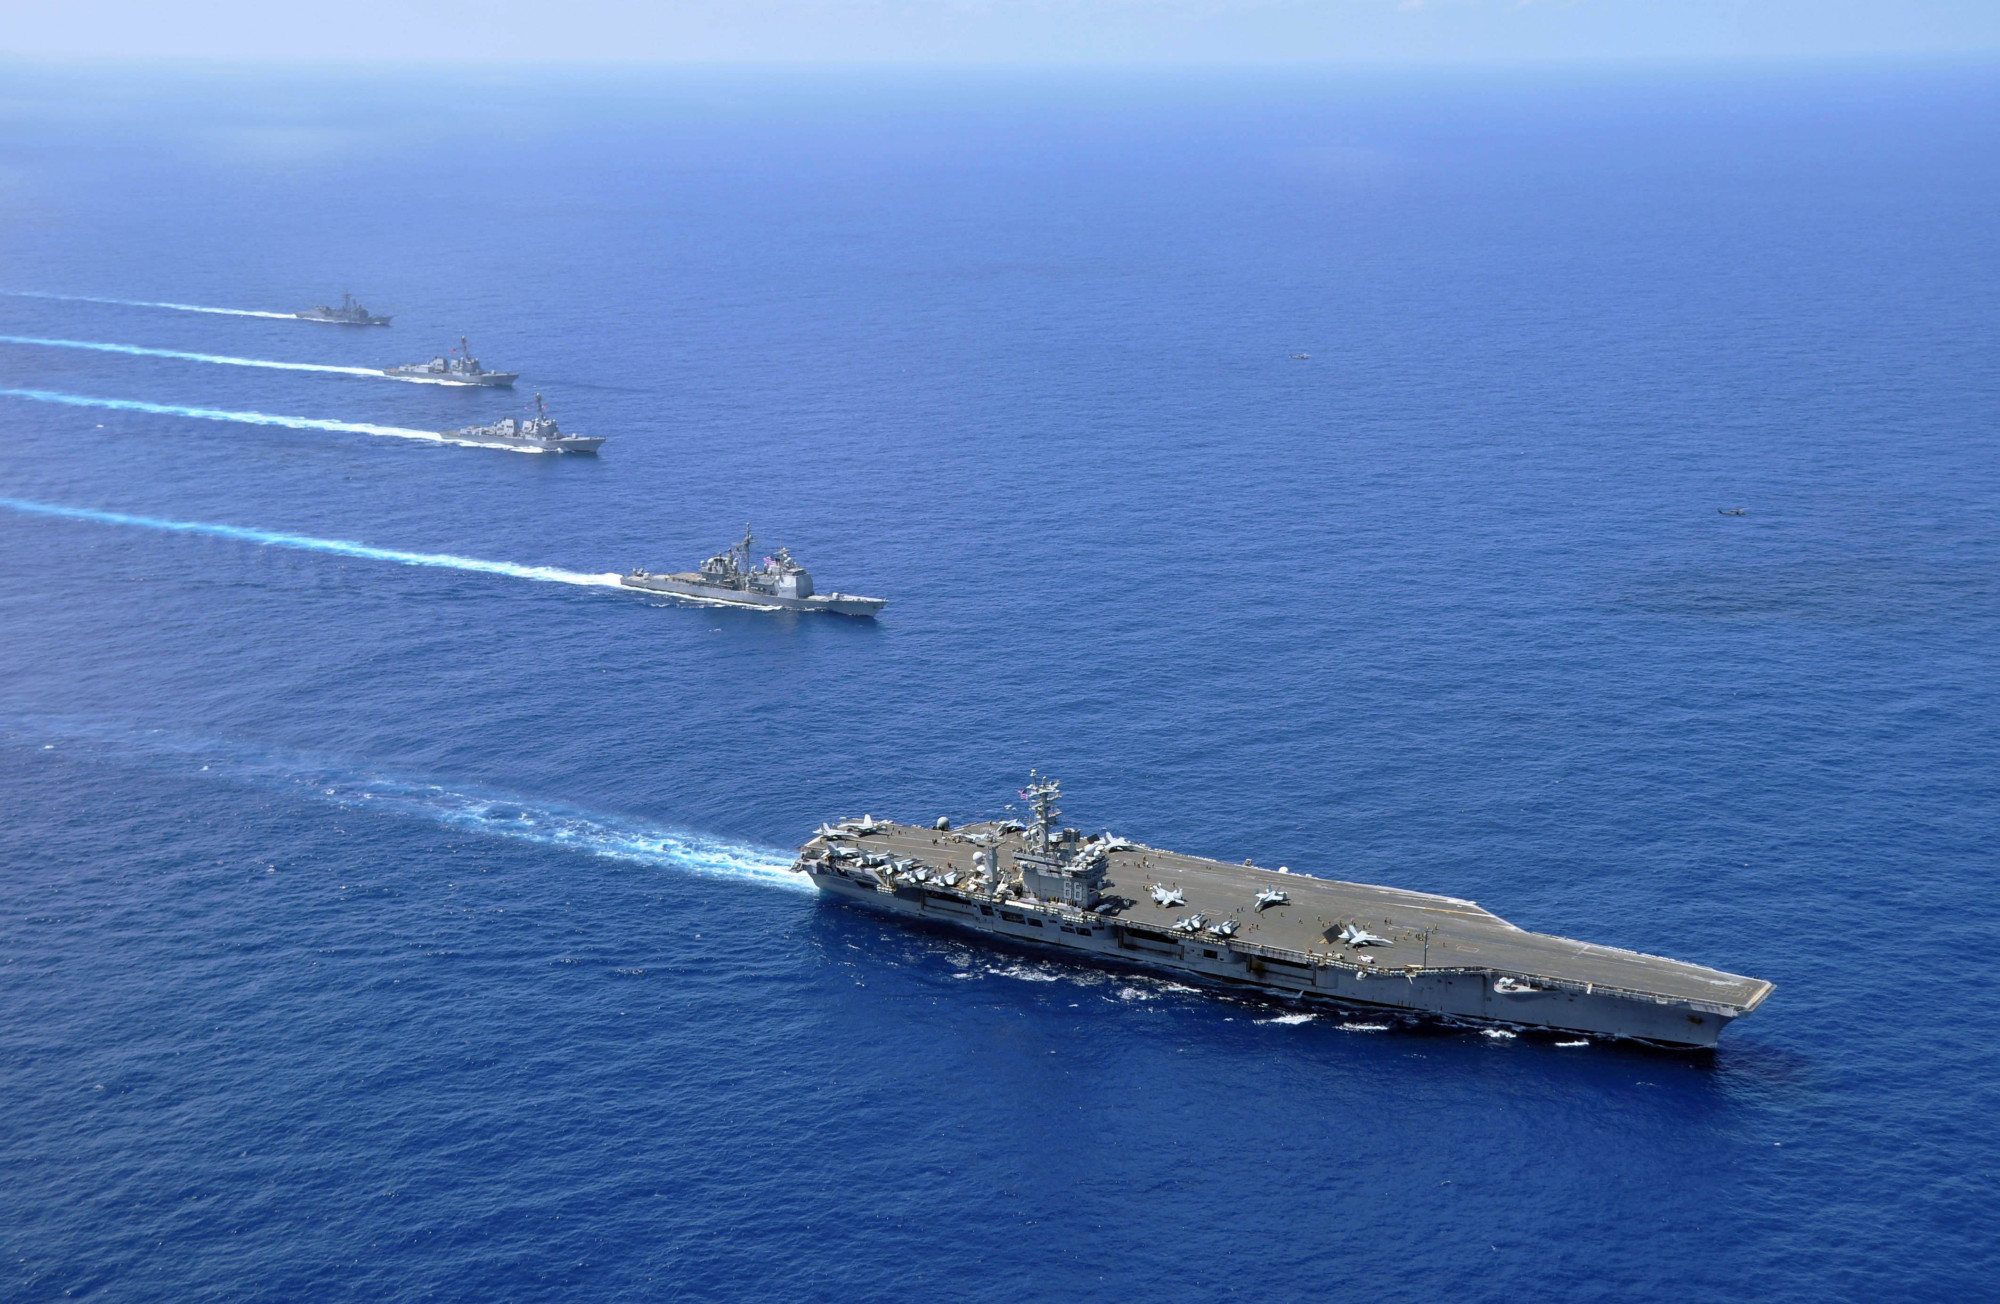 U.S. freedom of navigation operations in the South China Sea, such as this one conducted by the Nimitz carrier group in 2010, have done little to slow Beijing's efforts to boost its military presence in the disputed waters . | U.S. NAVY